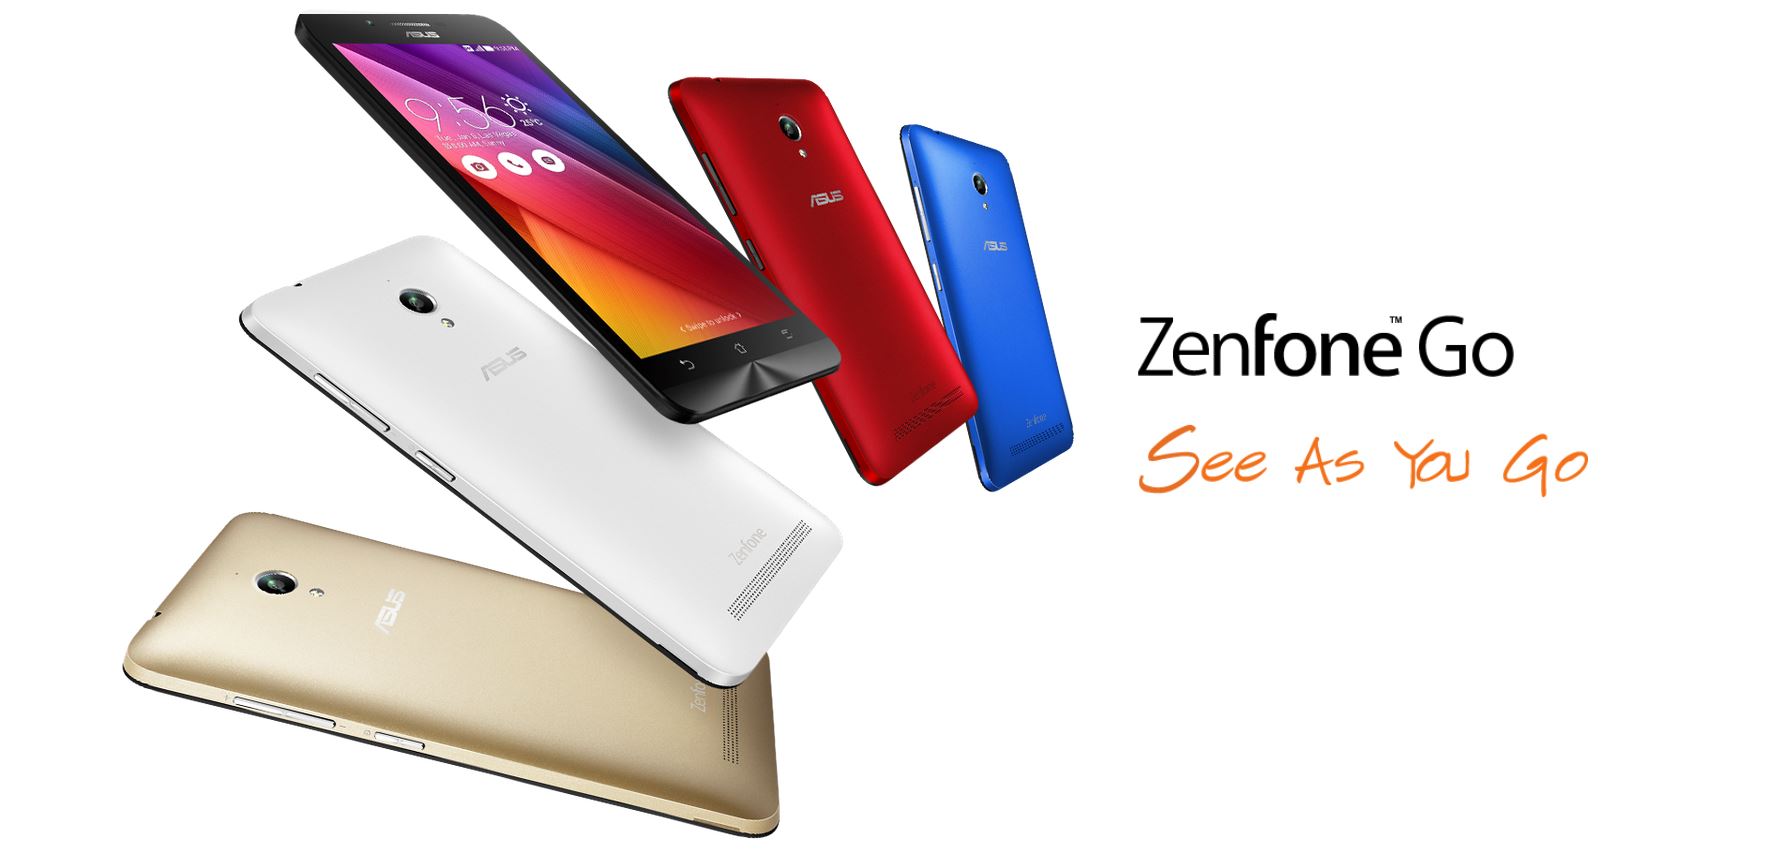 ASUS Zenfone GO is now available in ASUS MY store 31